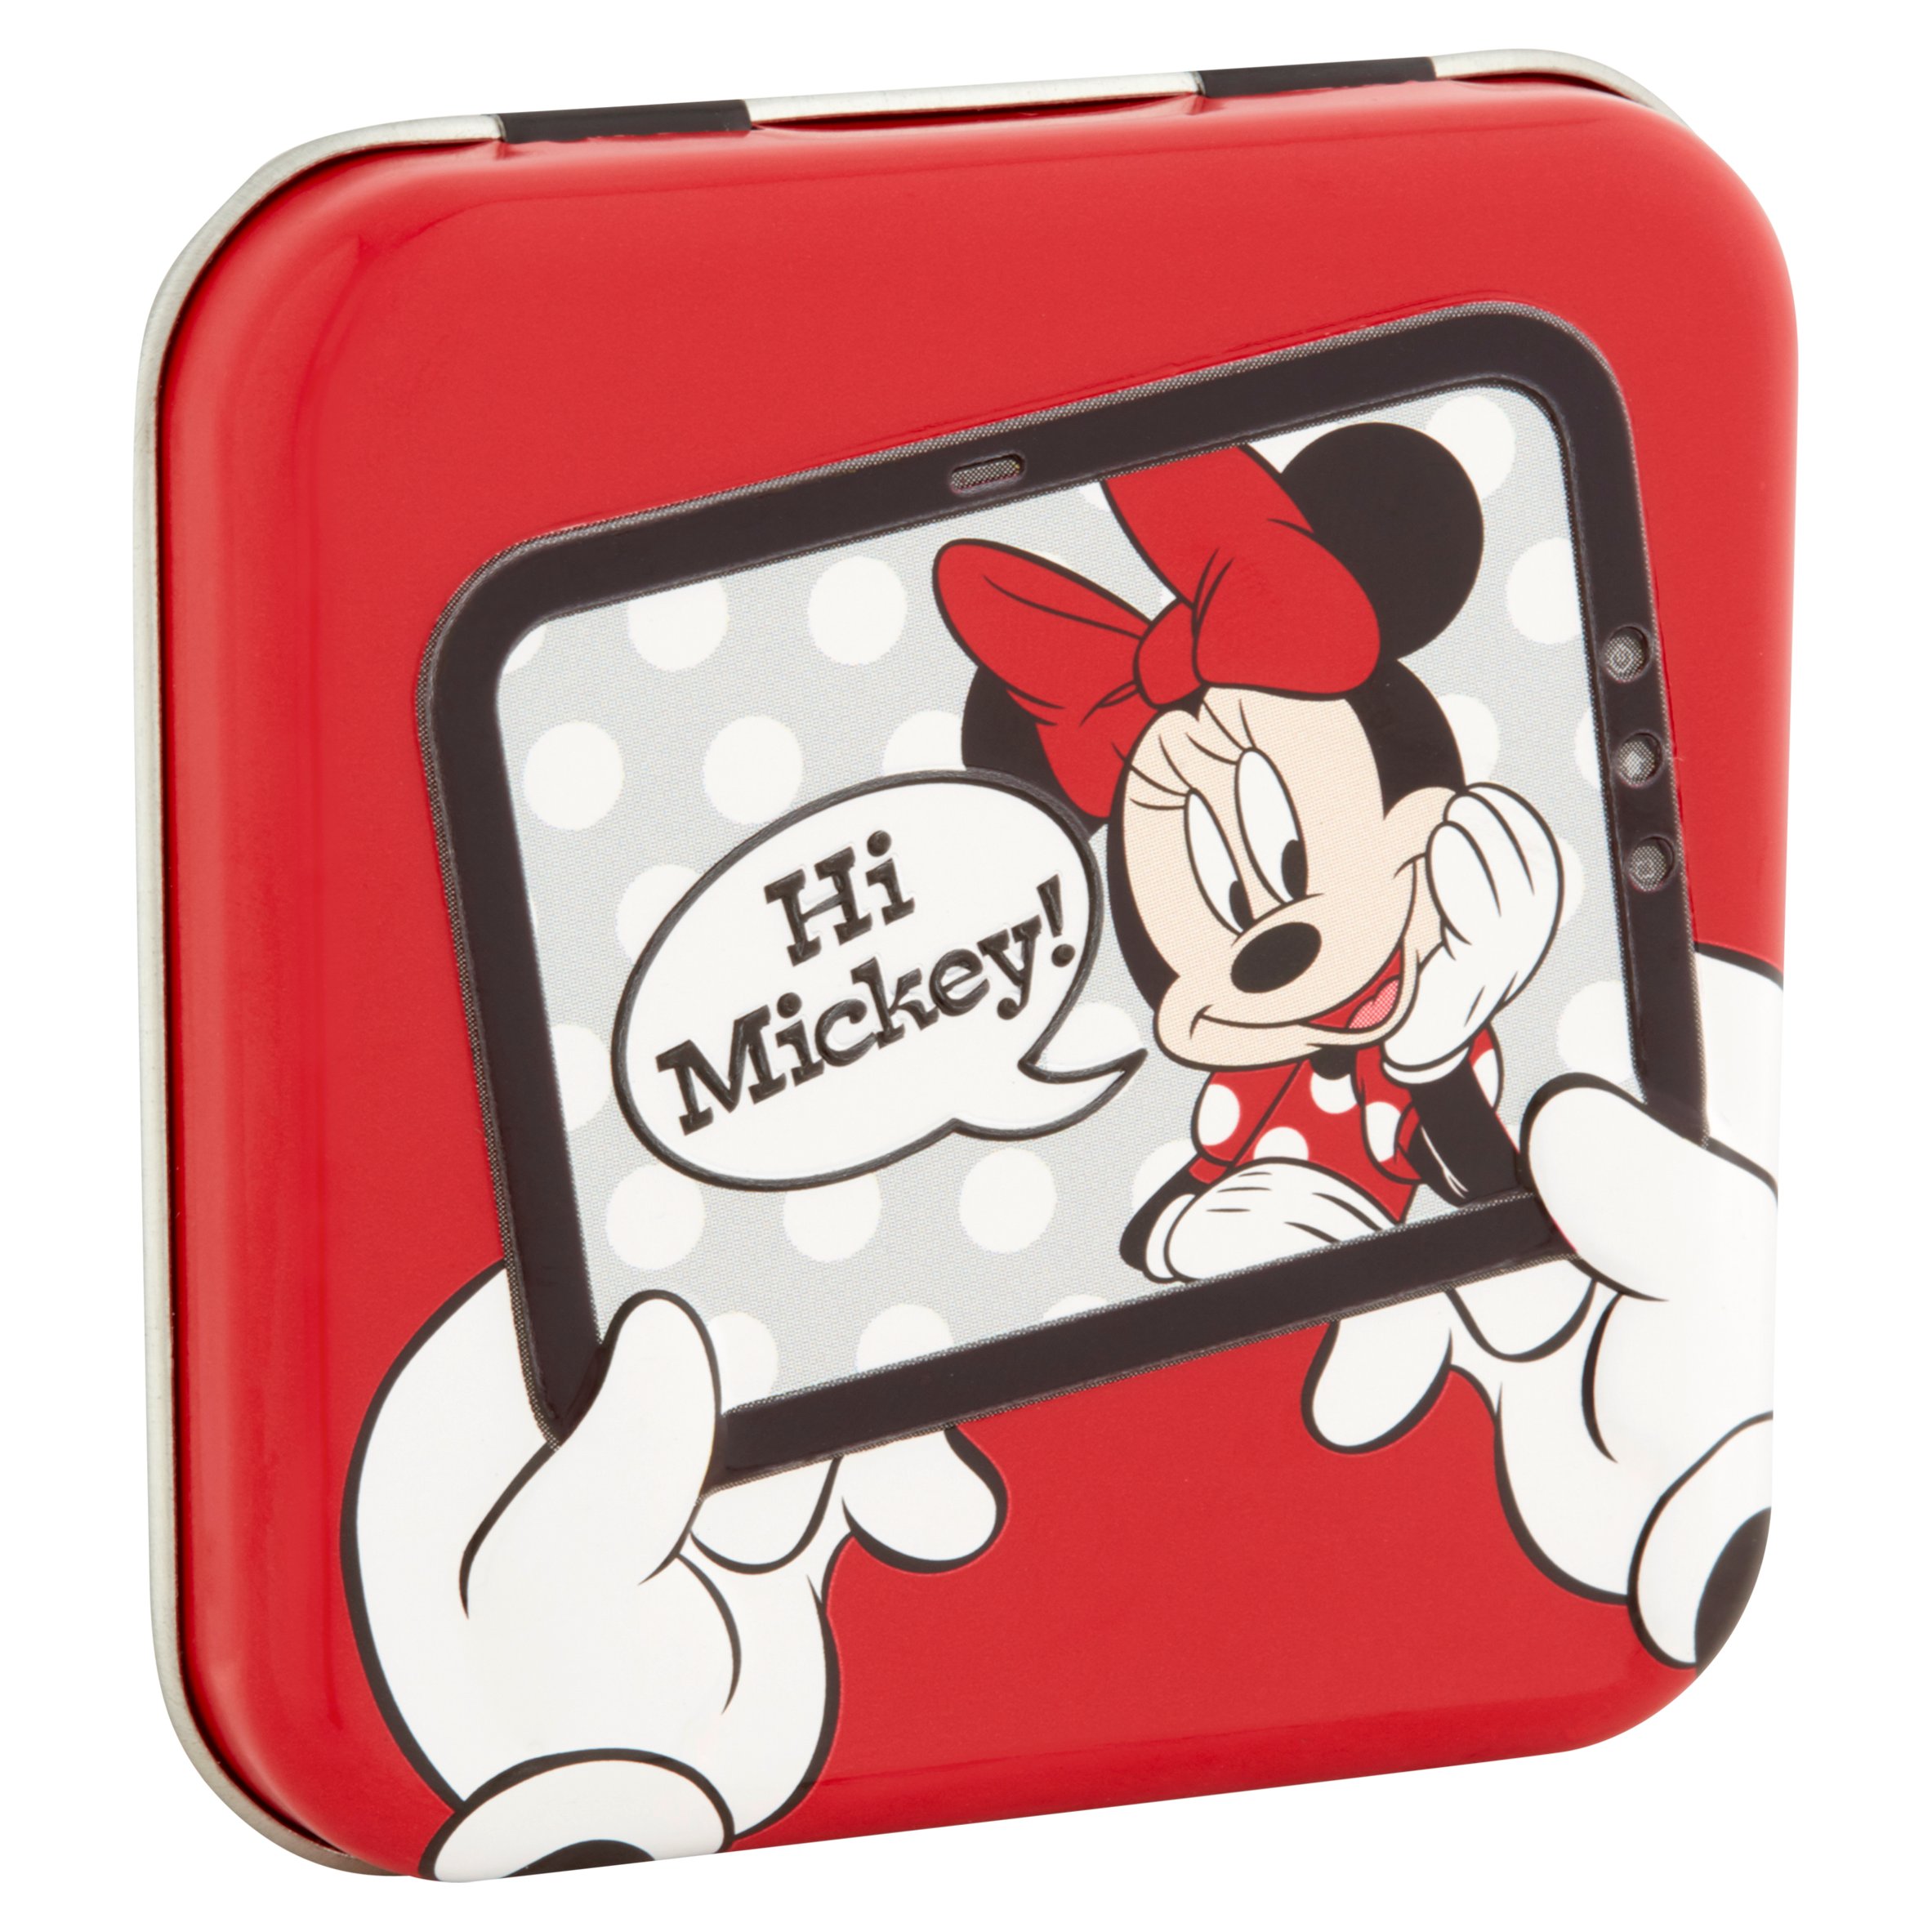 Cotton Buds Minnie Mouse Smart Phone Screen Cleaner Tablet - image 2 of 4